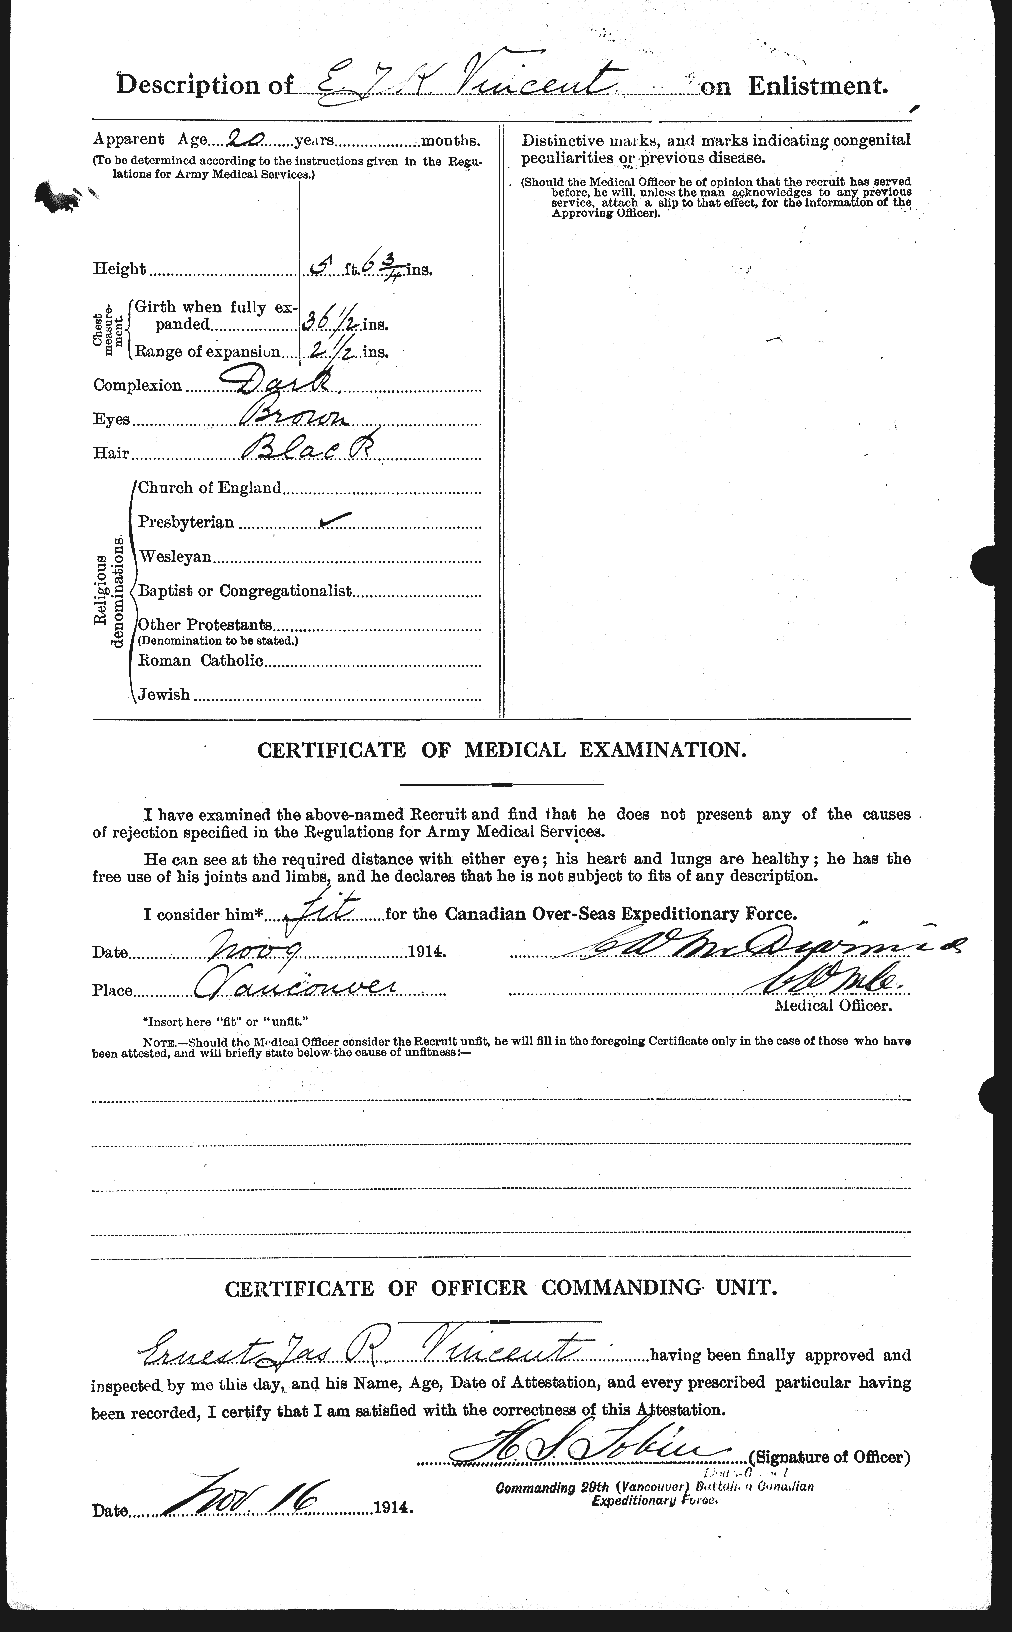 Personnel Records of the First World War - CEF 656399b